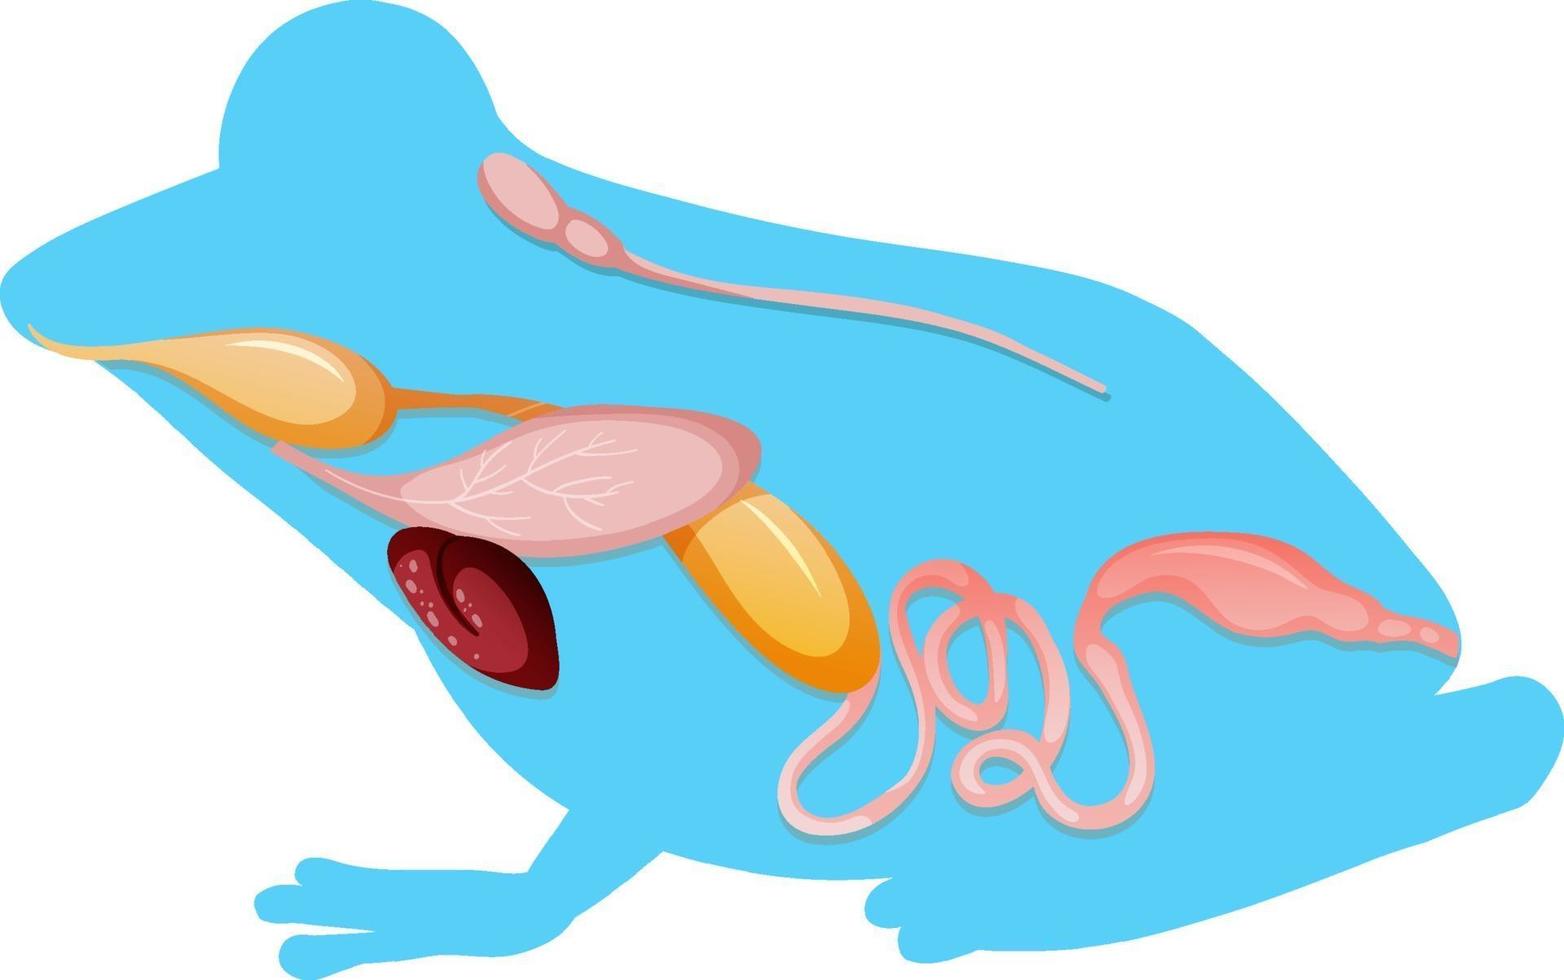 Internal anatomy of frog with organs vector